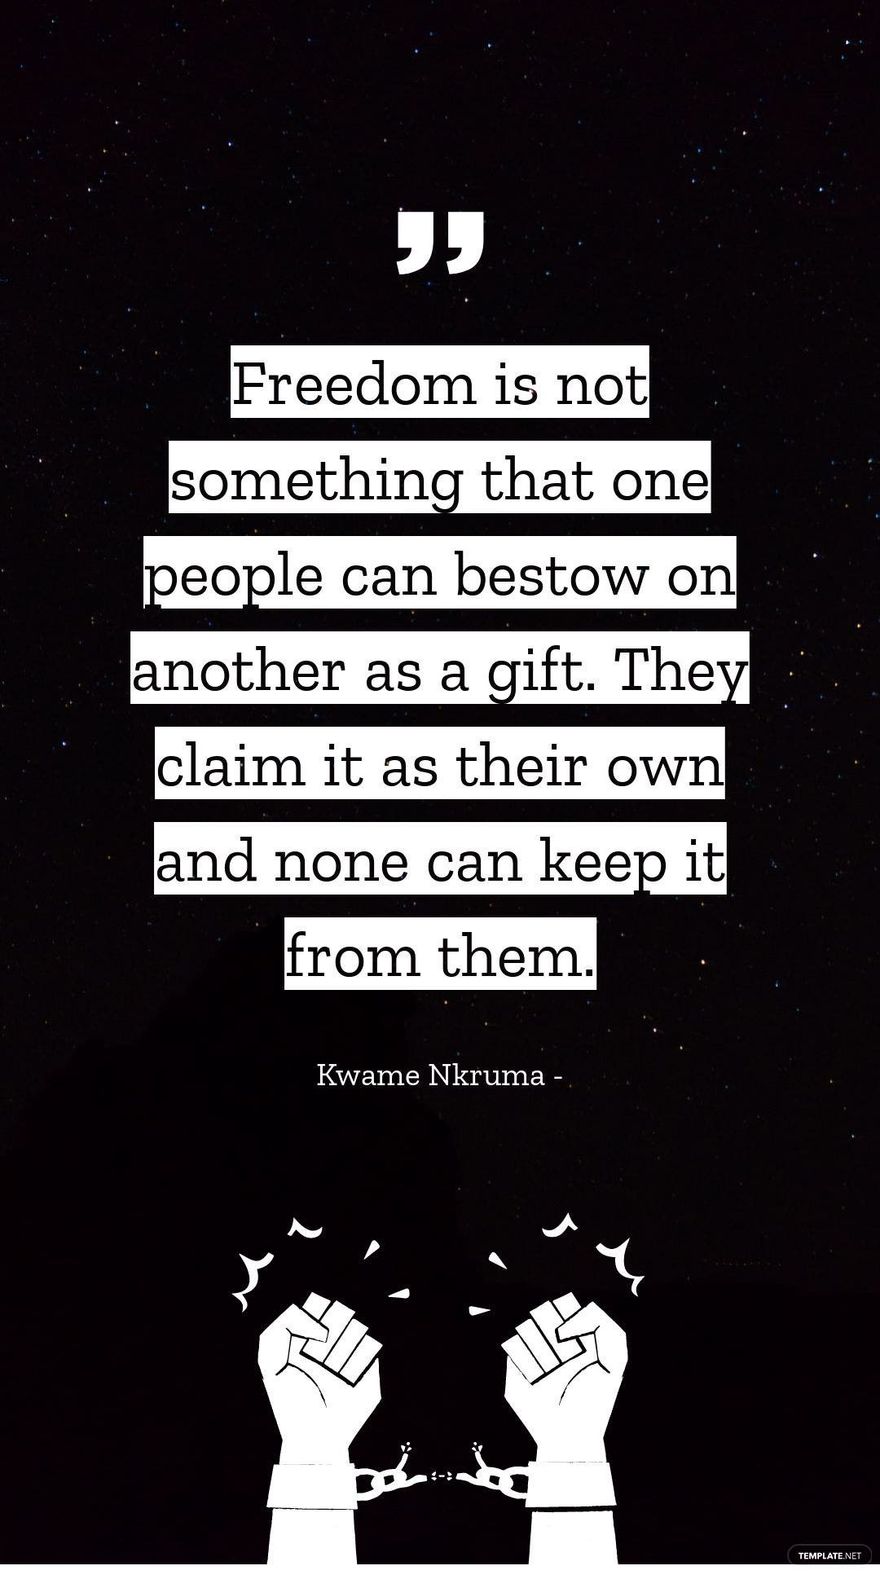 Kwame Nkruma - Freedom is not something that one people can bestow on another as a gift. They claim it as their own and none can keep it from them.